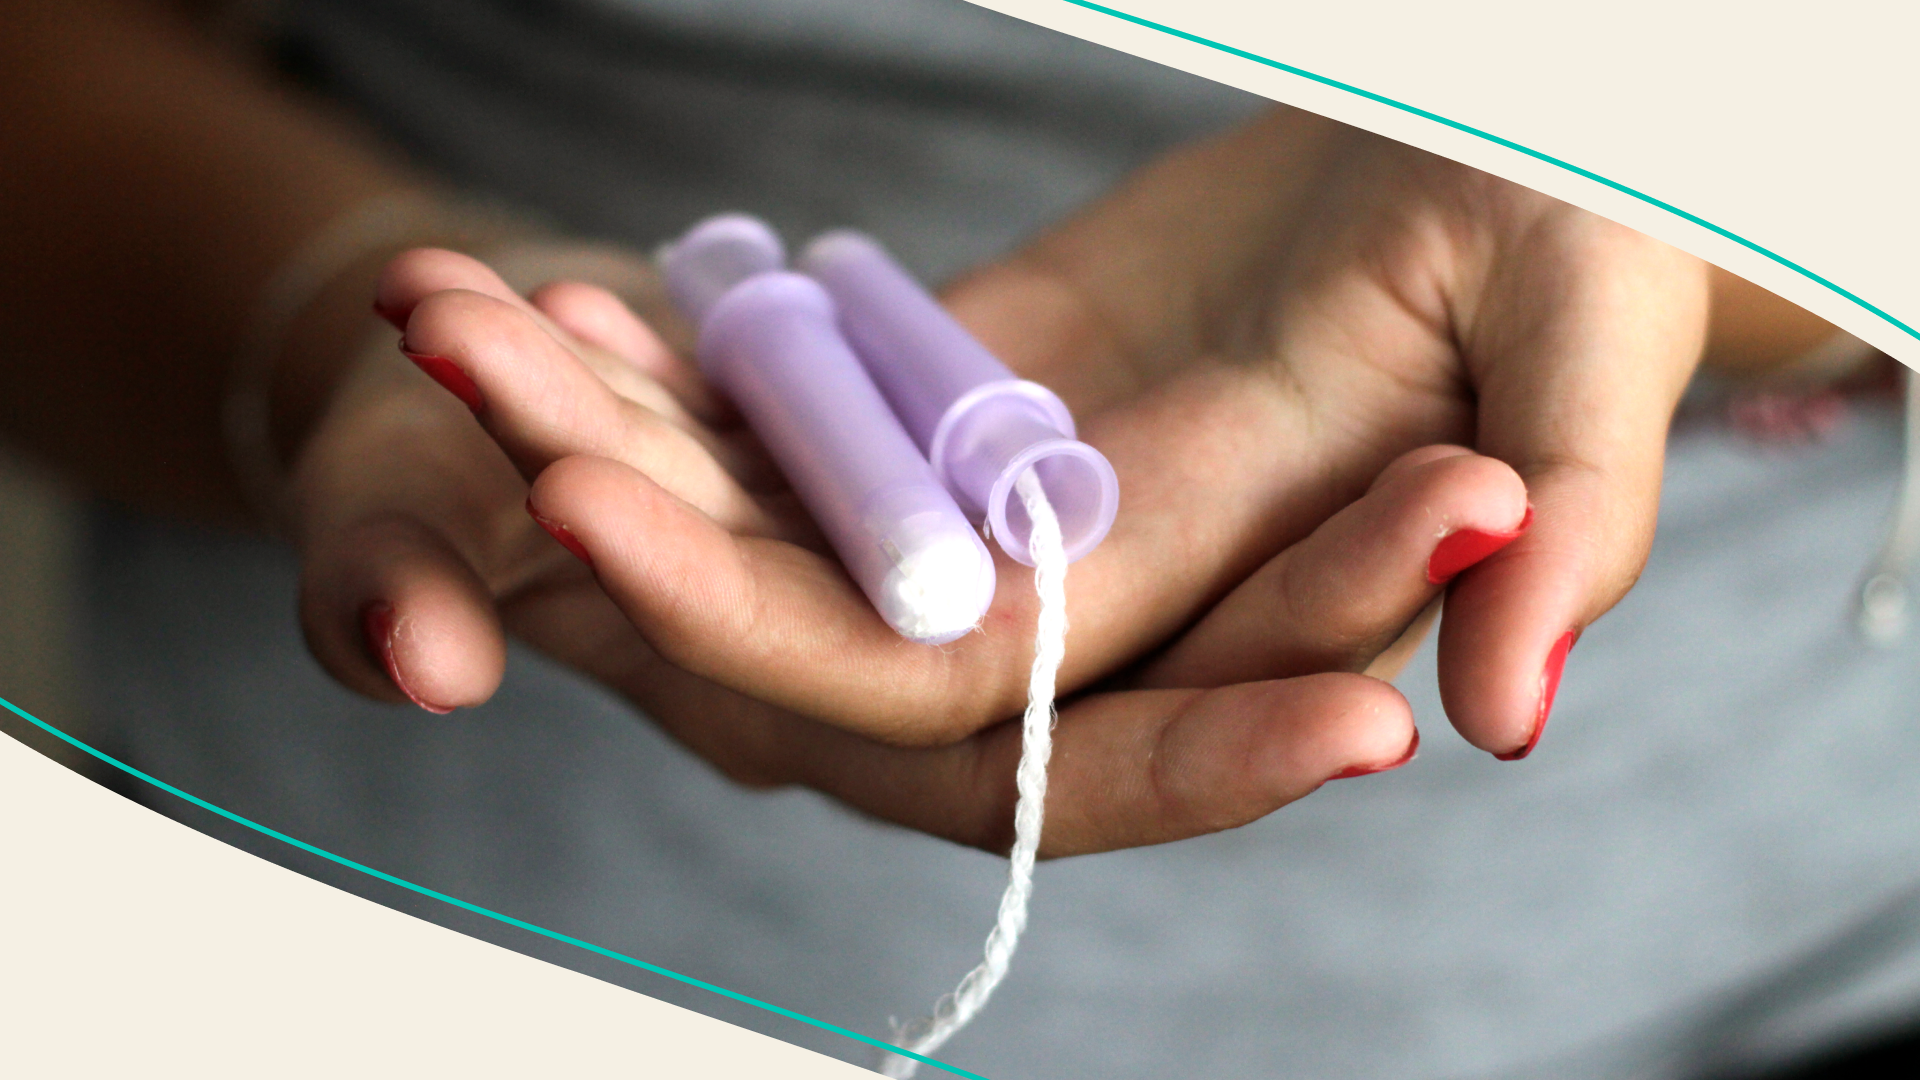 A Healthy Period: Are Tampons Safe To Use?